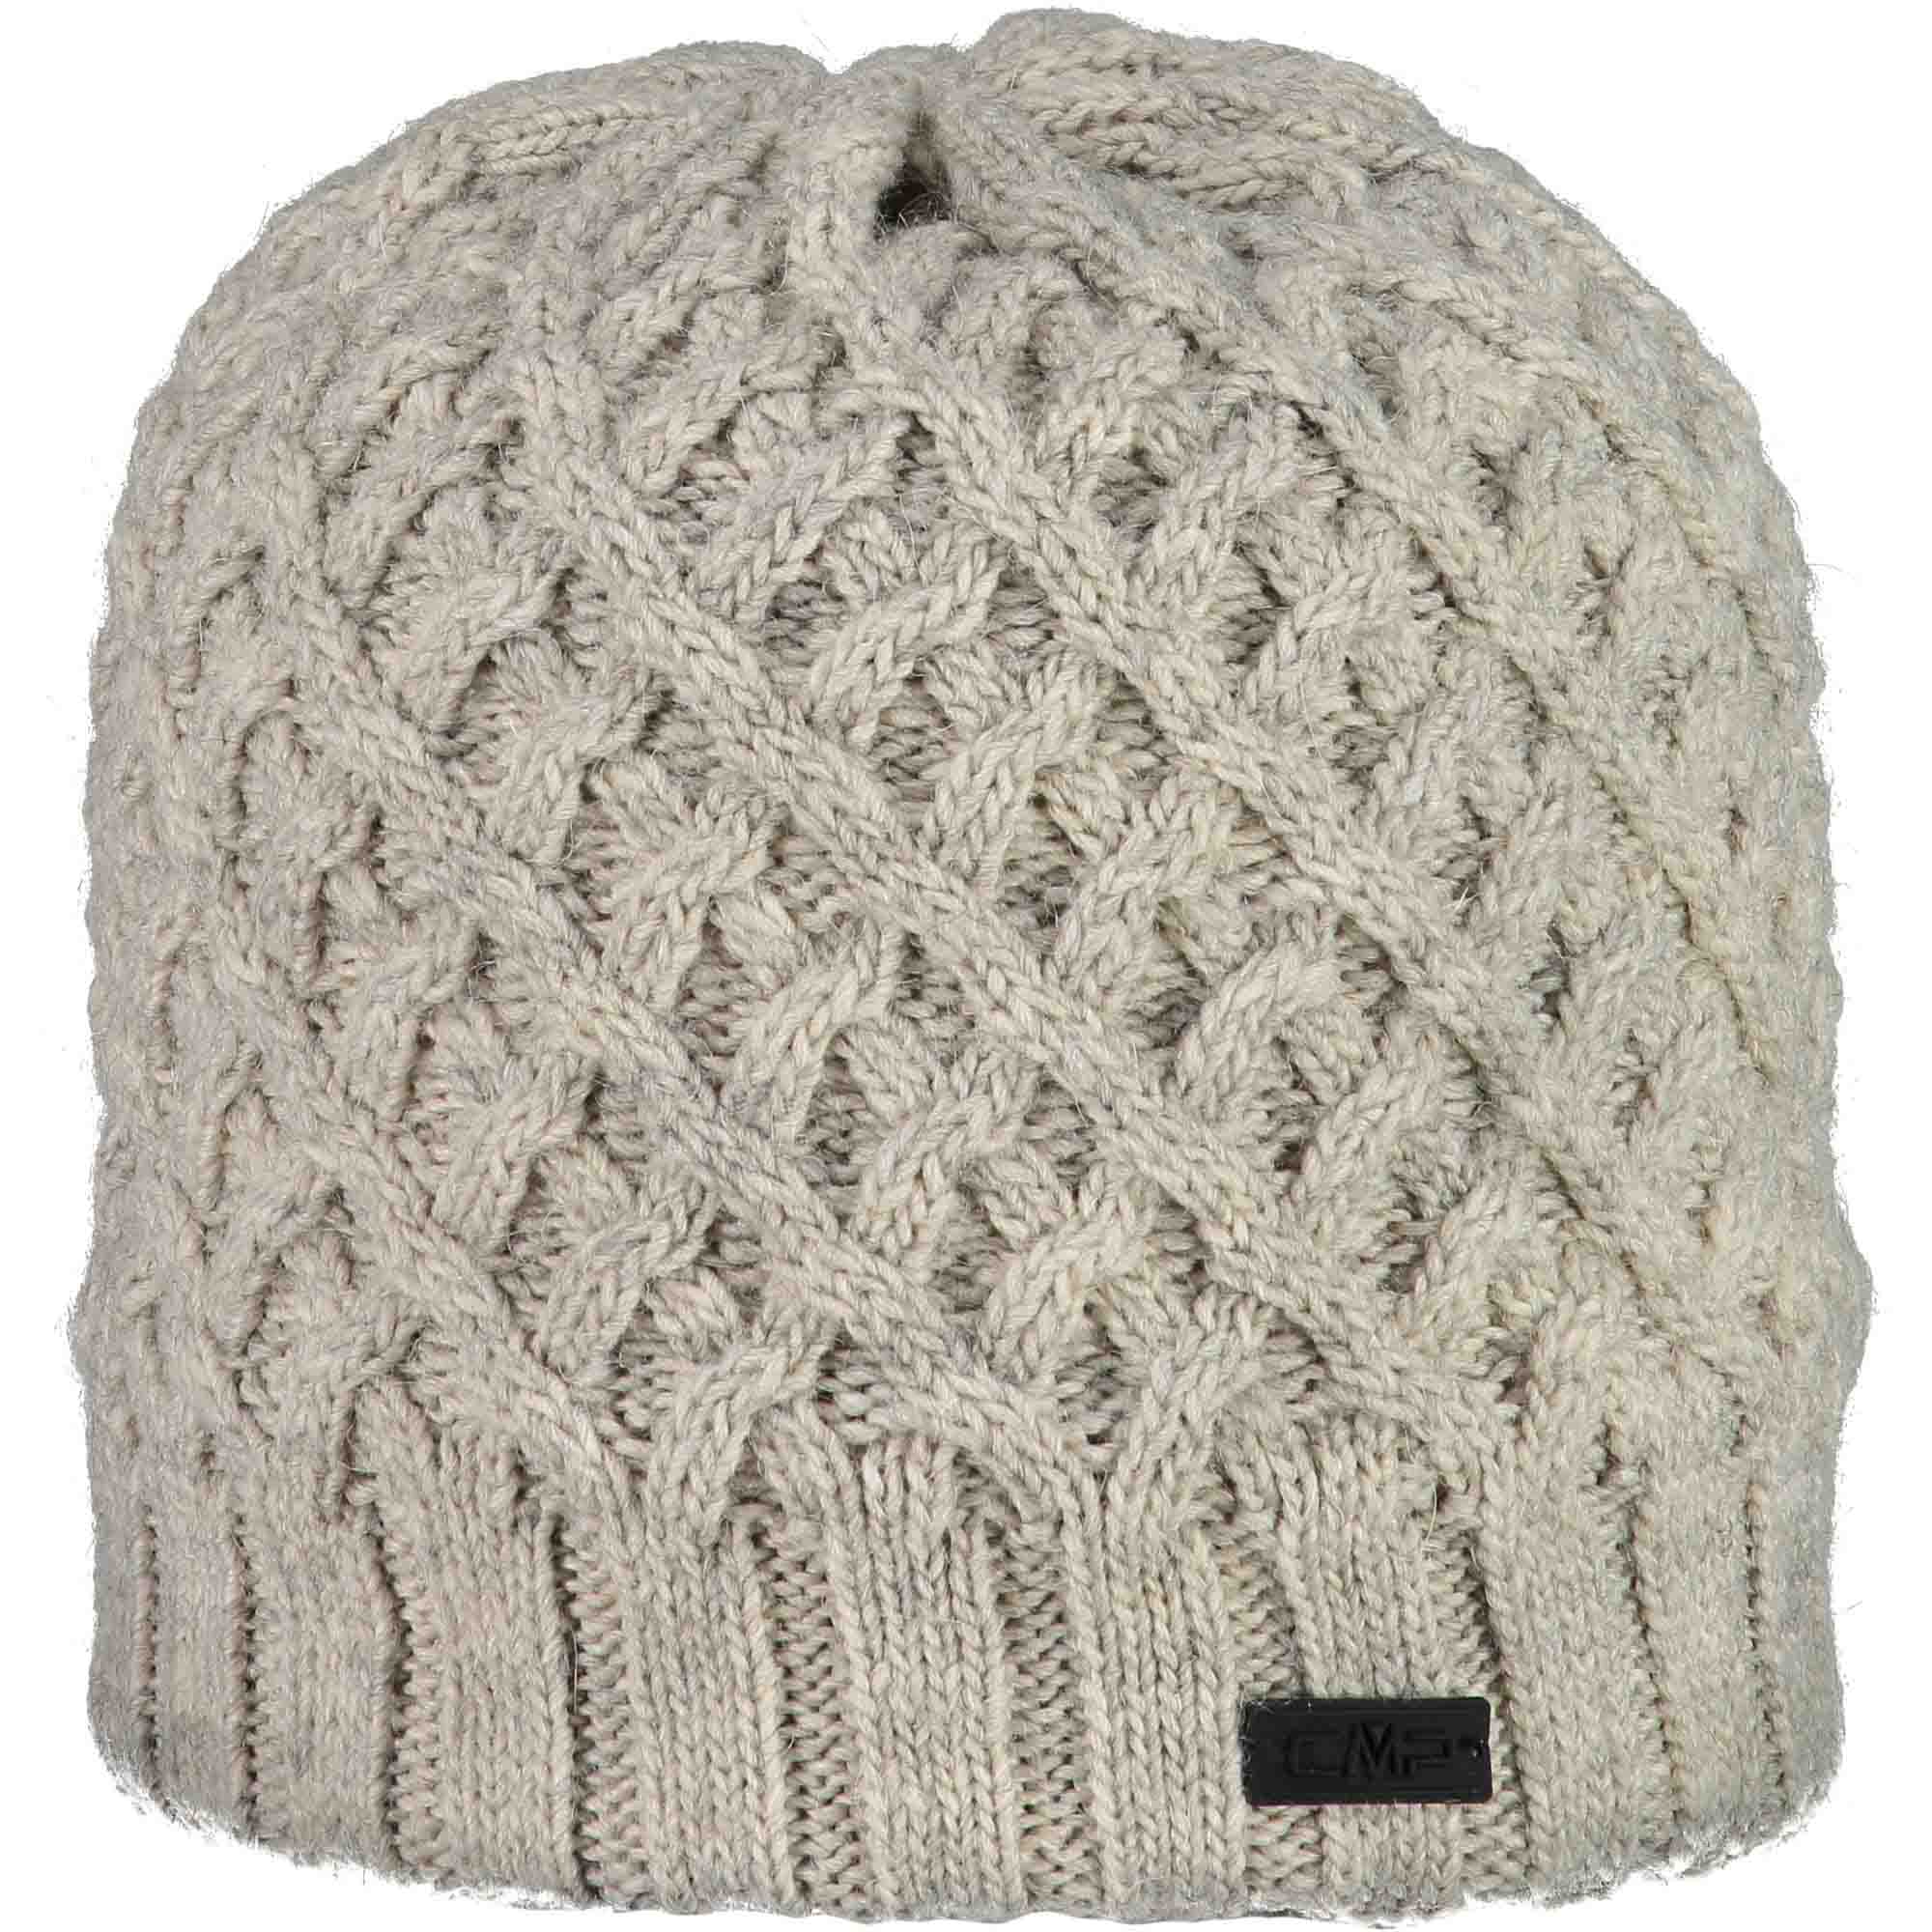 Woman Knitted Hat 5505405